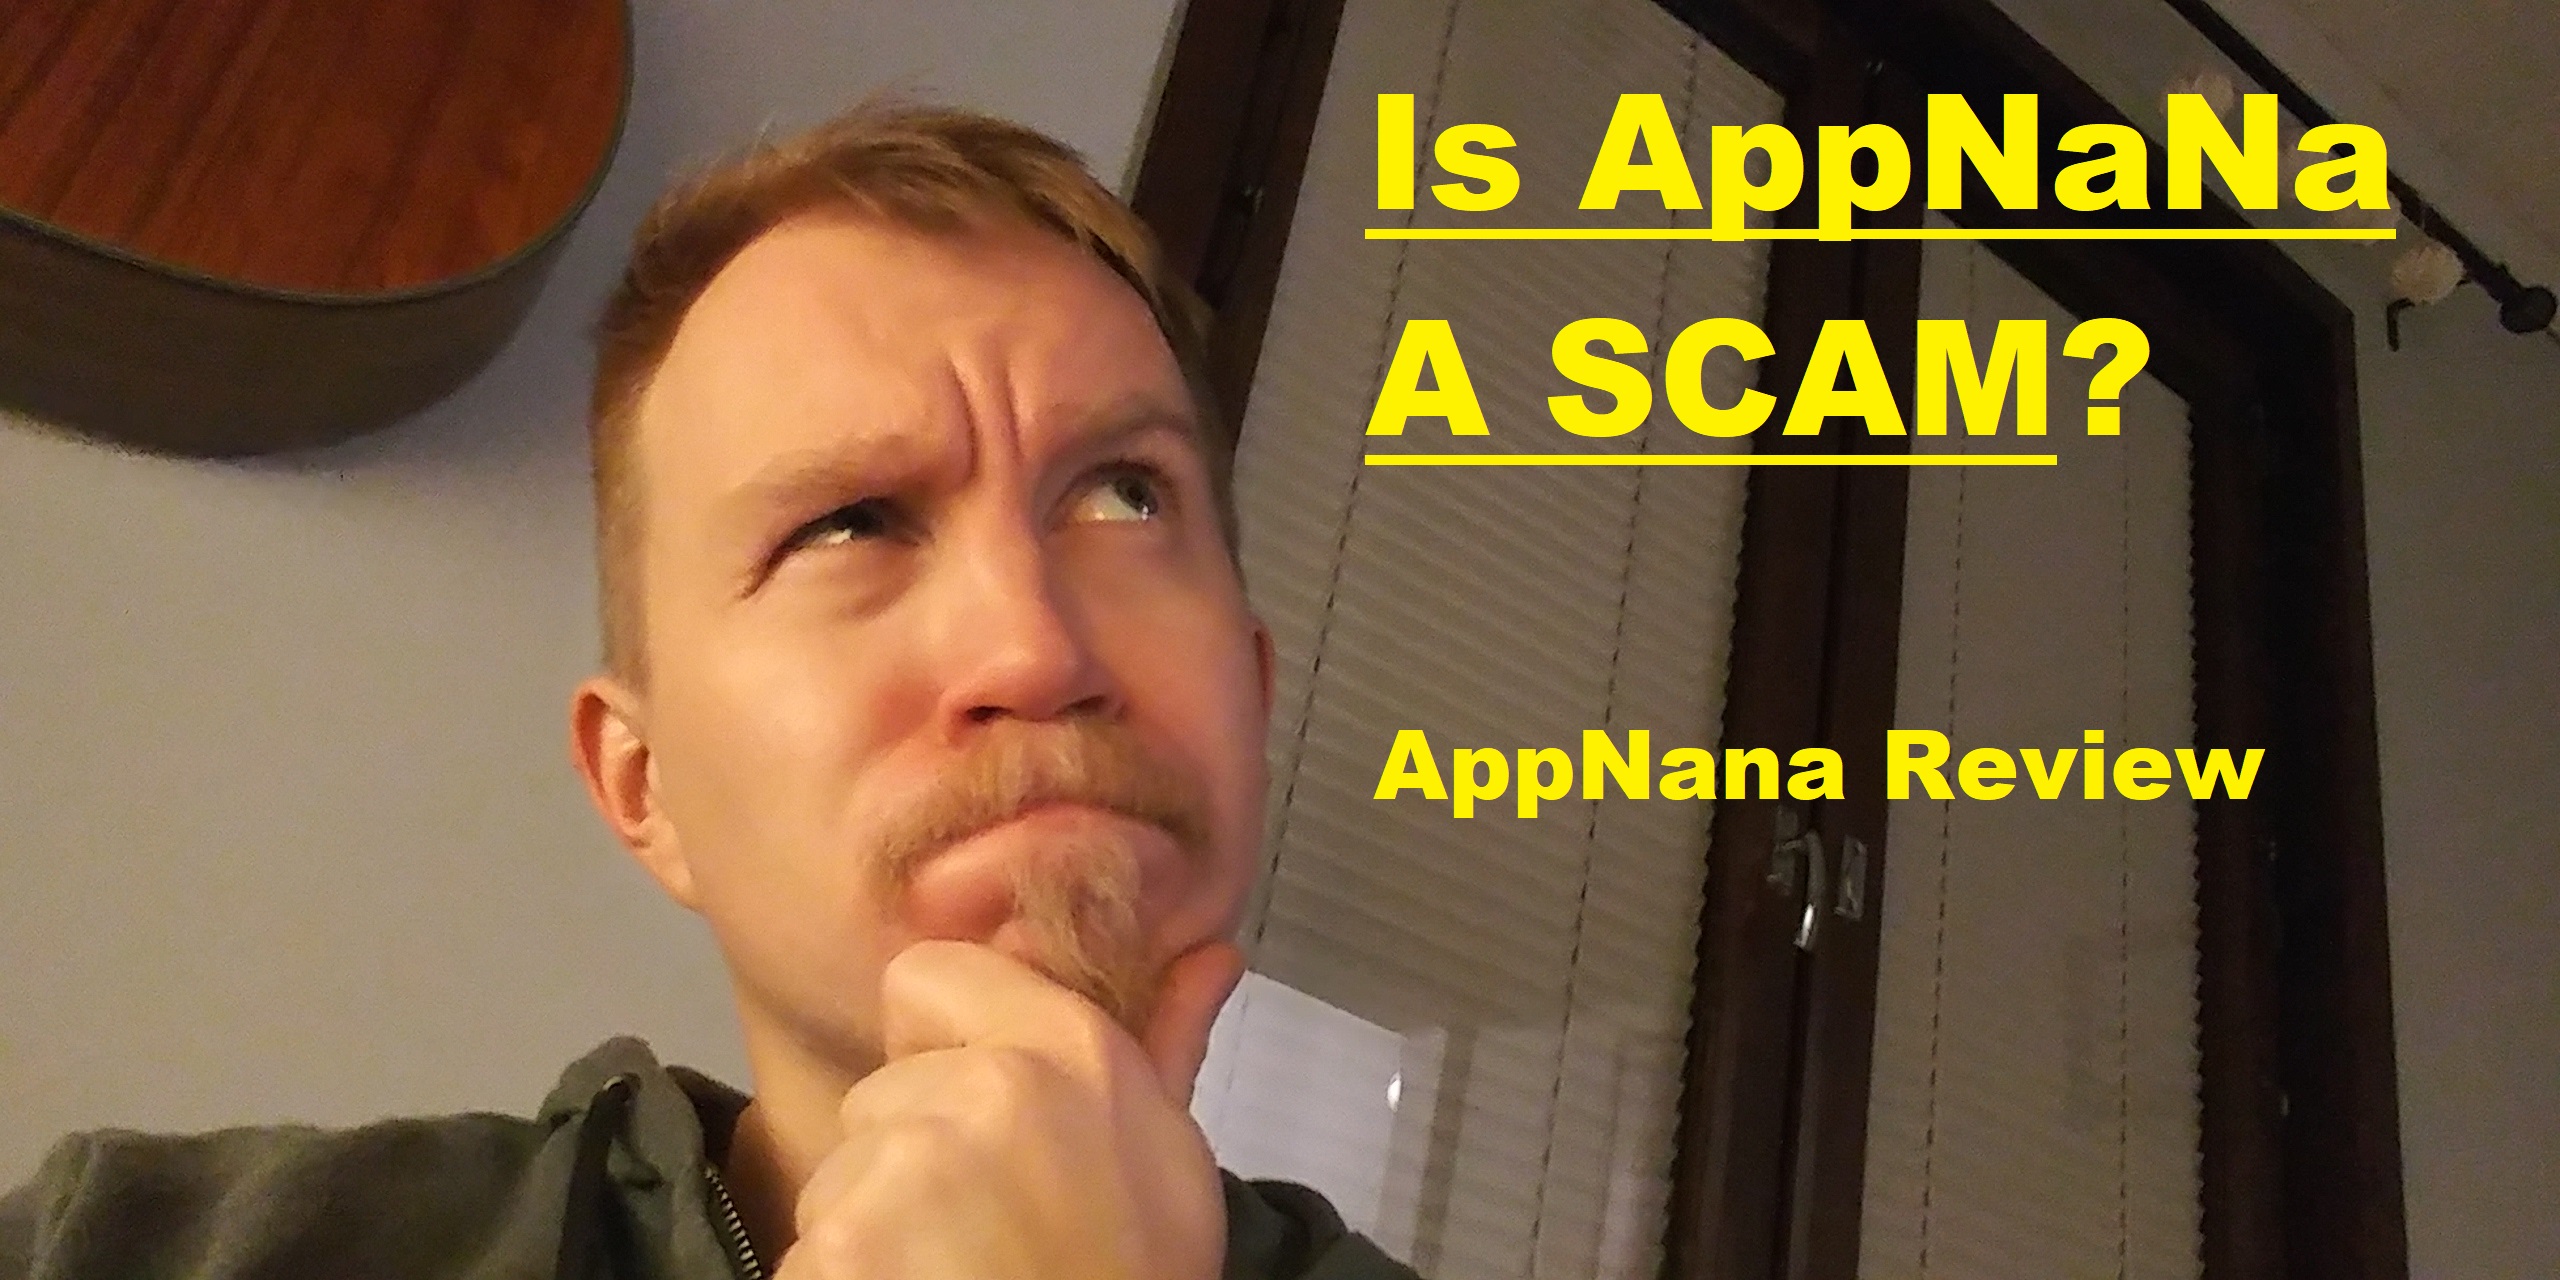 Is Appnana a scam?